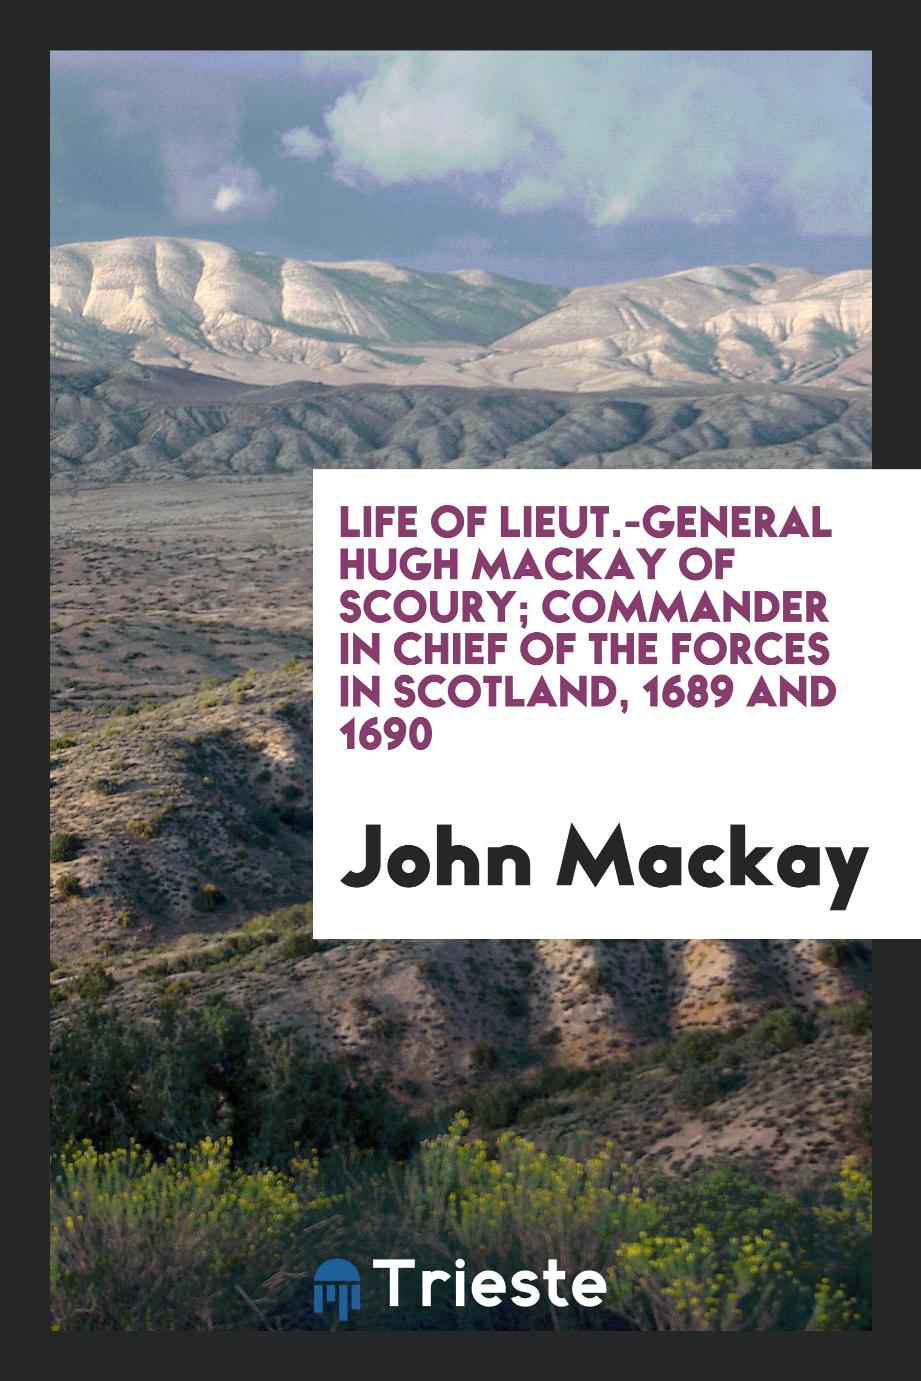 Life of Lieut.-General Hugh Mackay of Scoury; commander in chief of the forces in Scotland, 1689 and 1690